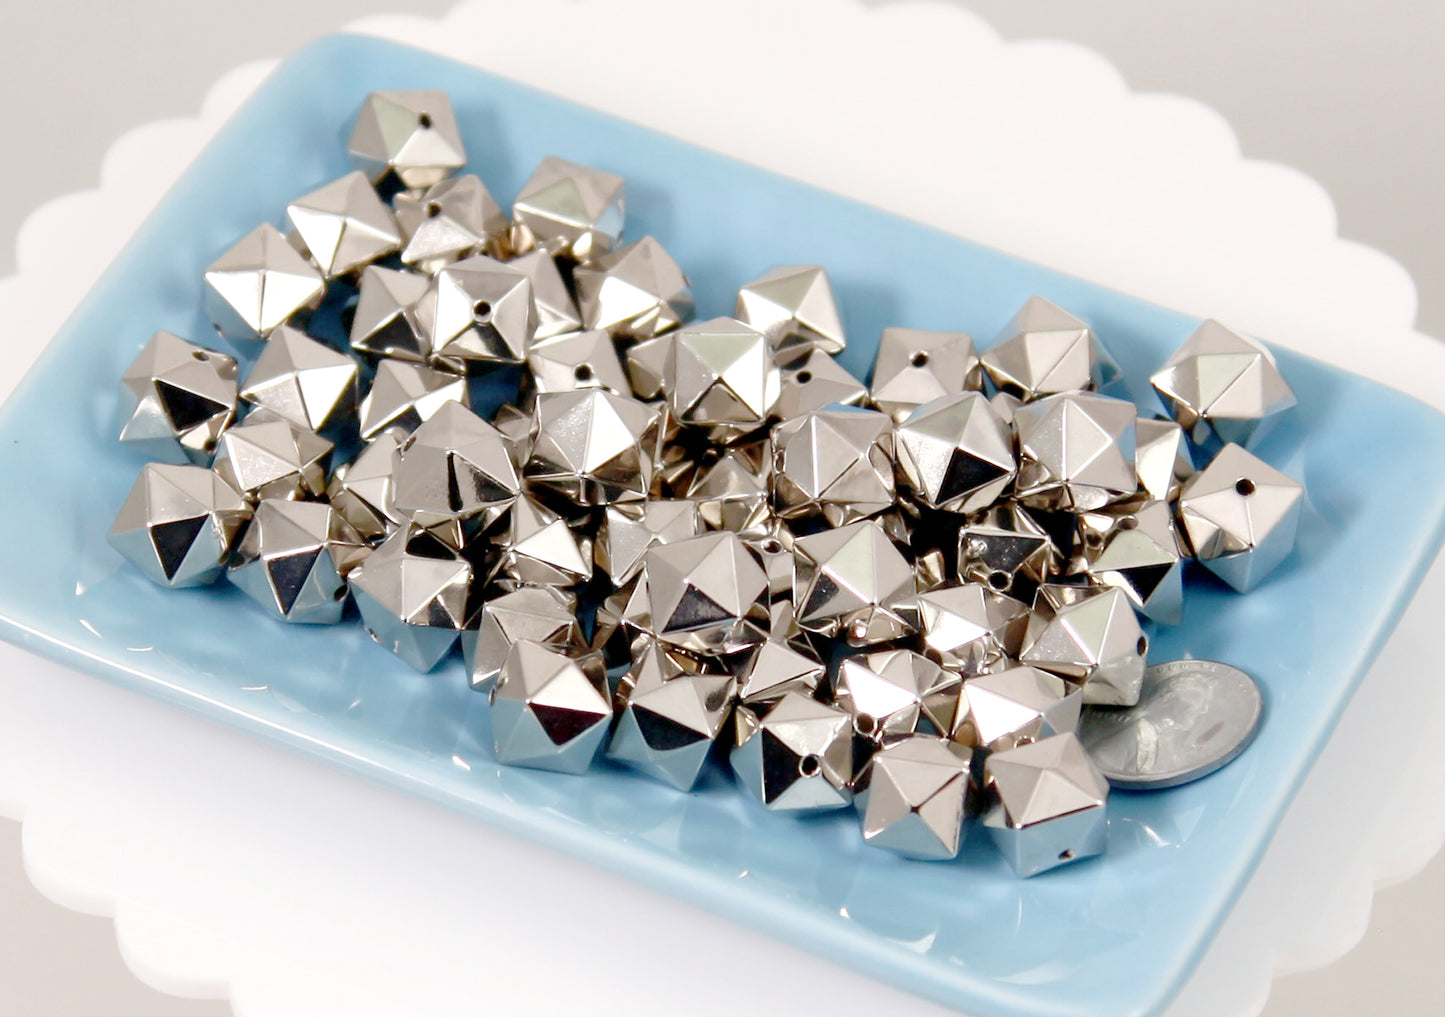 Spike Cube Beads - 25 pc set - 17mm Spiky Stud Cube Bead - Electroplated Silver - Drilled with Holes to Easily make Jewelry